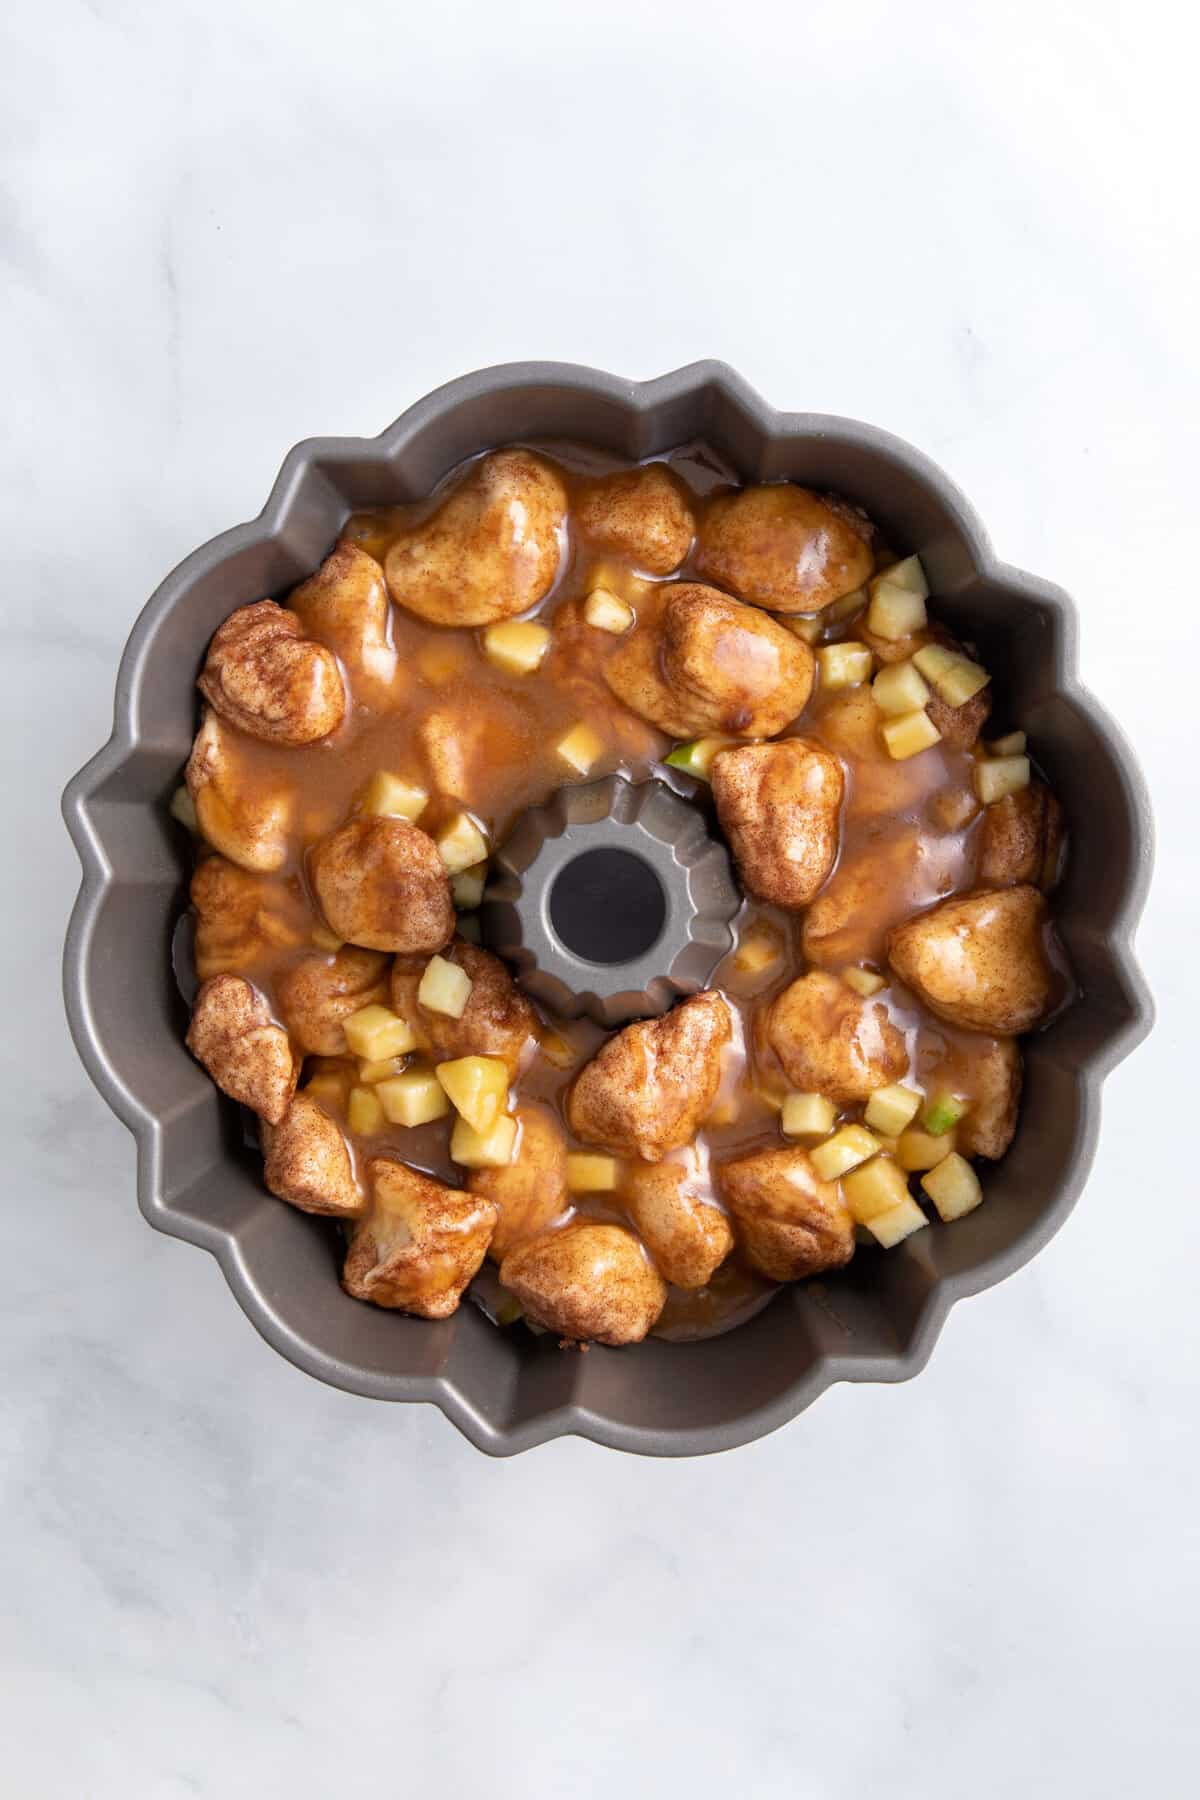 cinnamon dough pieces and chopped granny smith apples topped with more cinnamon dough and caramel sauce sitting in a bundt cake tin